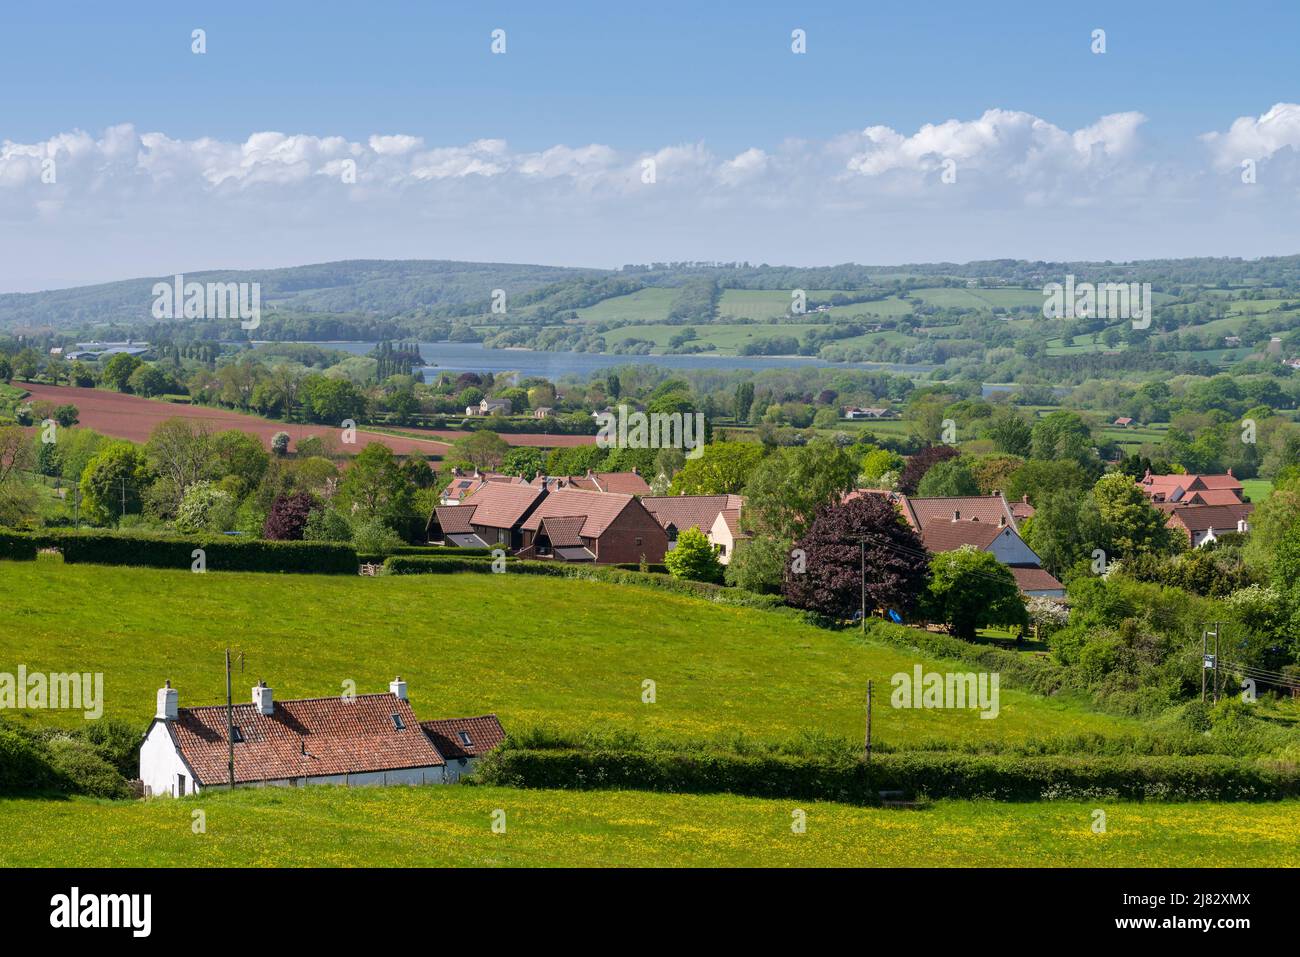 The village of Compton Martin at the foot of the Mendip Hills in the Chew Valley area with Blagdon Lake reservoir in the distance, Somerset, England. Stock Photo